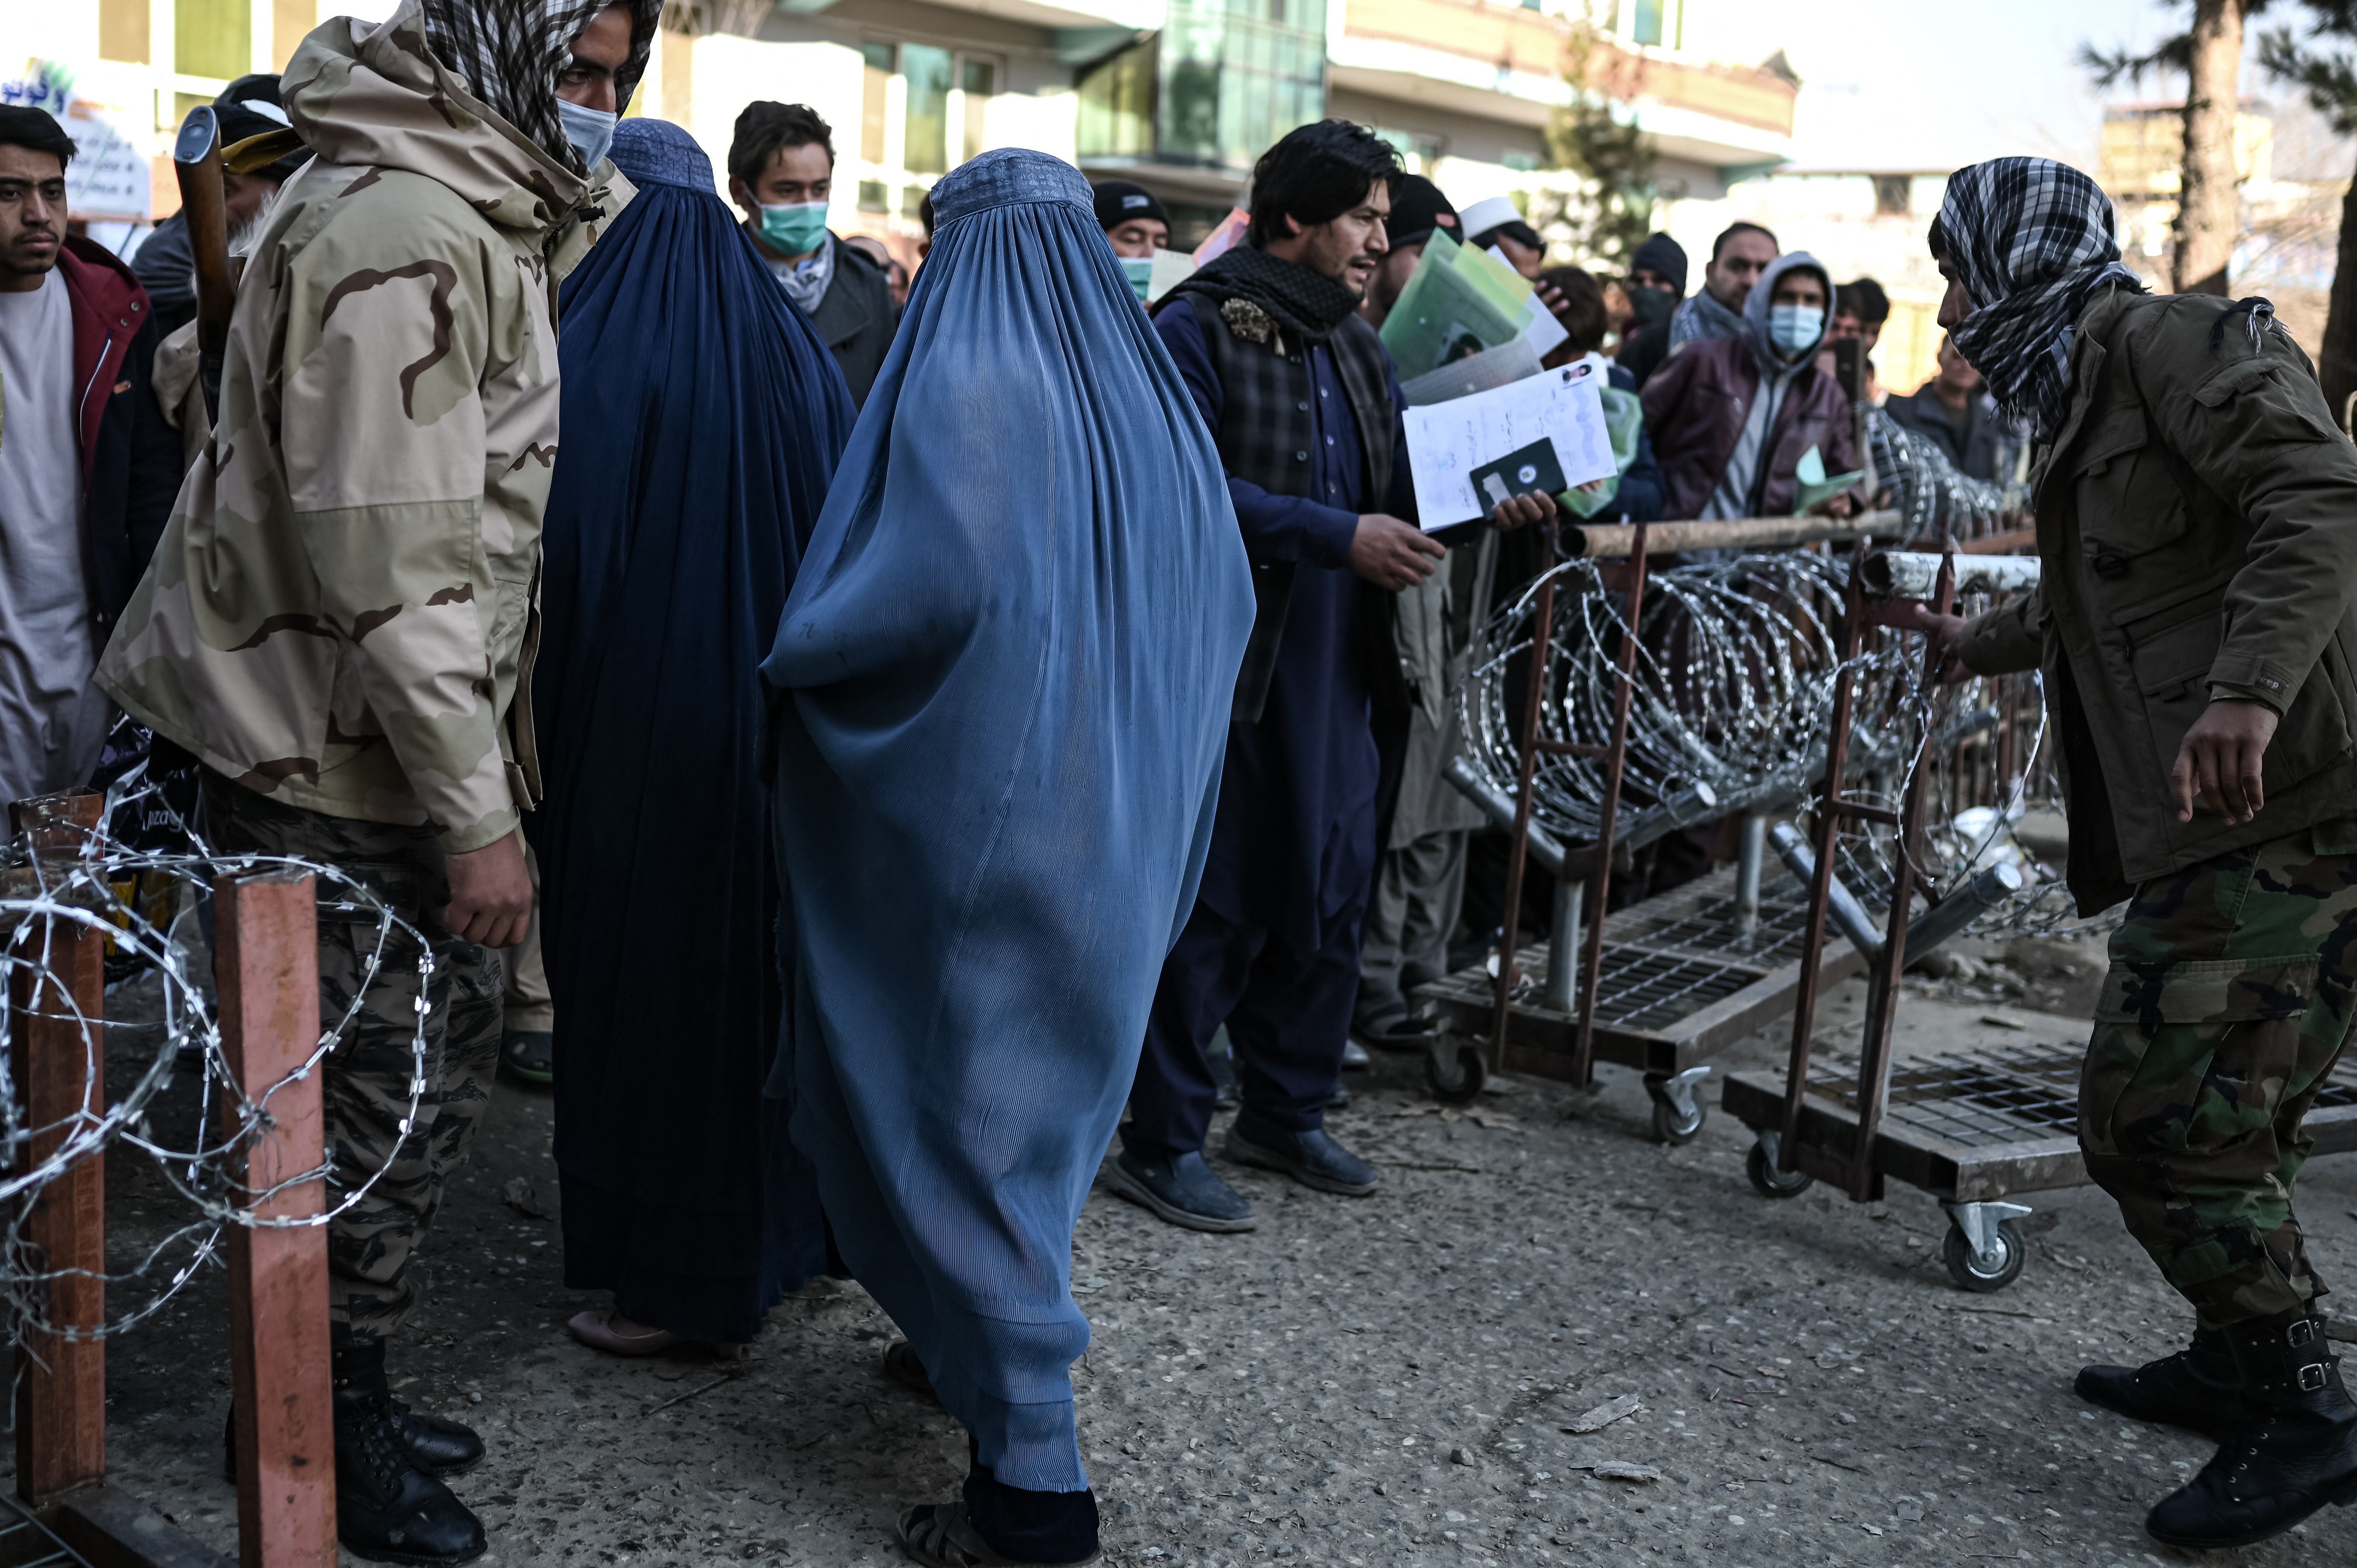 A woman wearing a burqa leaves the passport office in Kabul last month